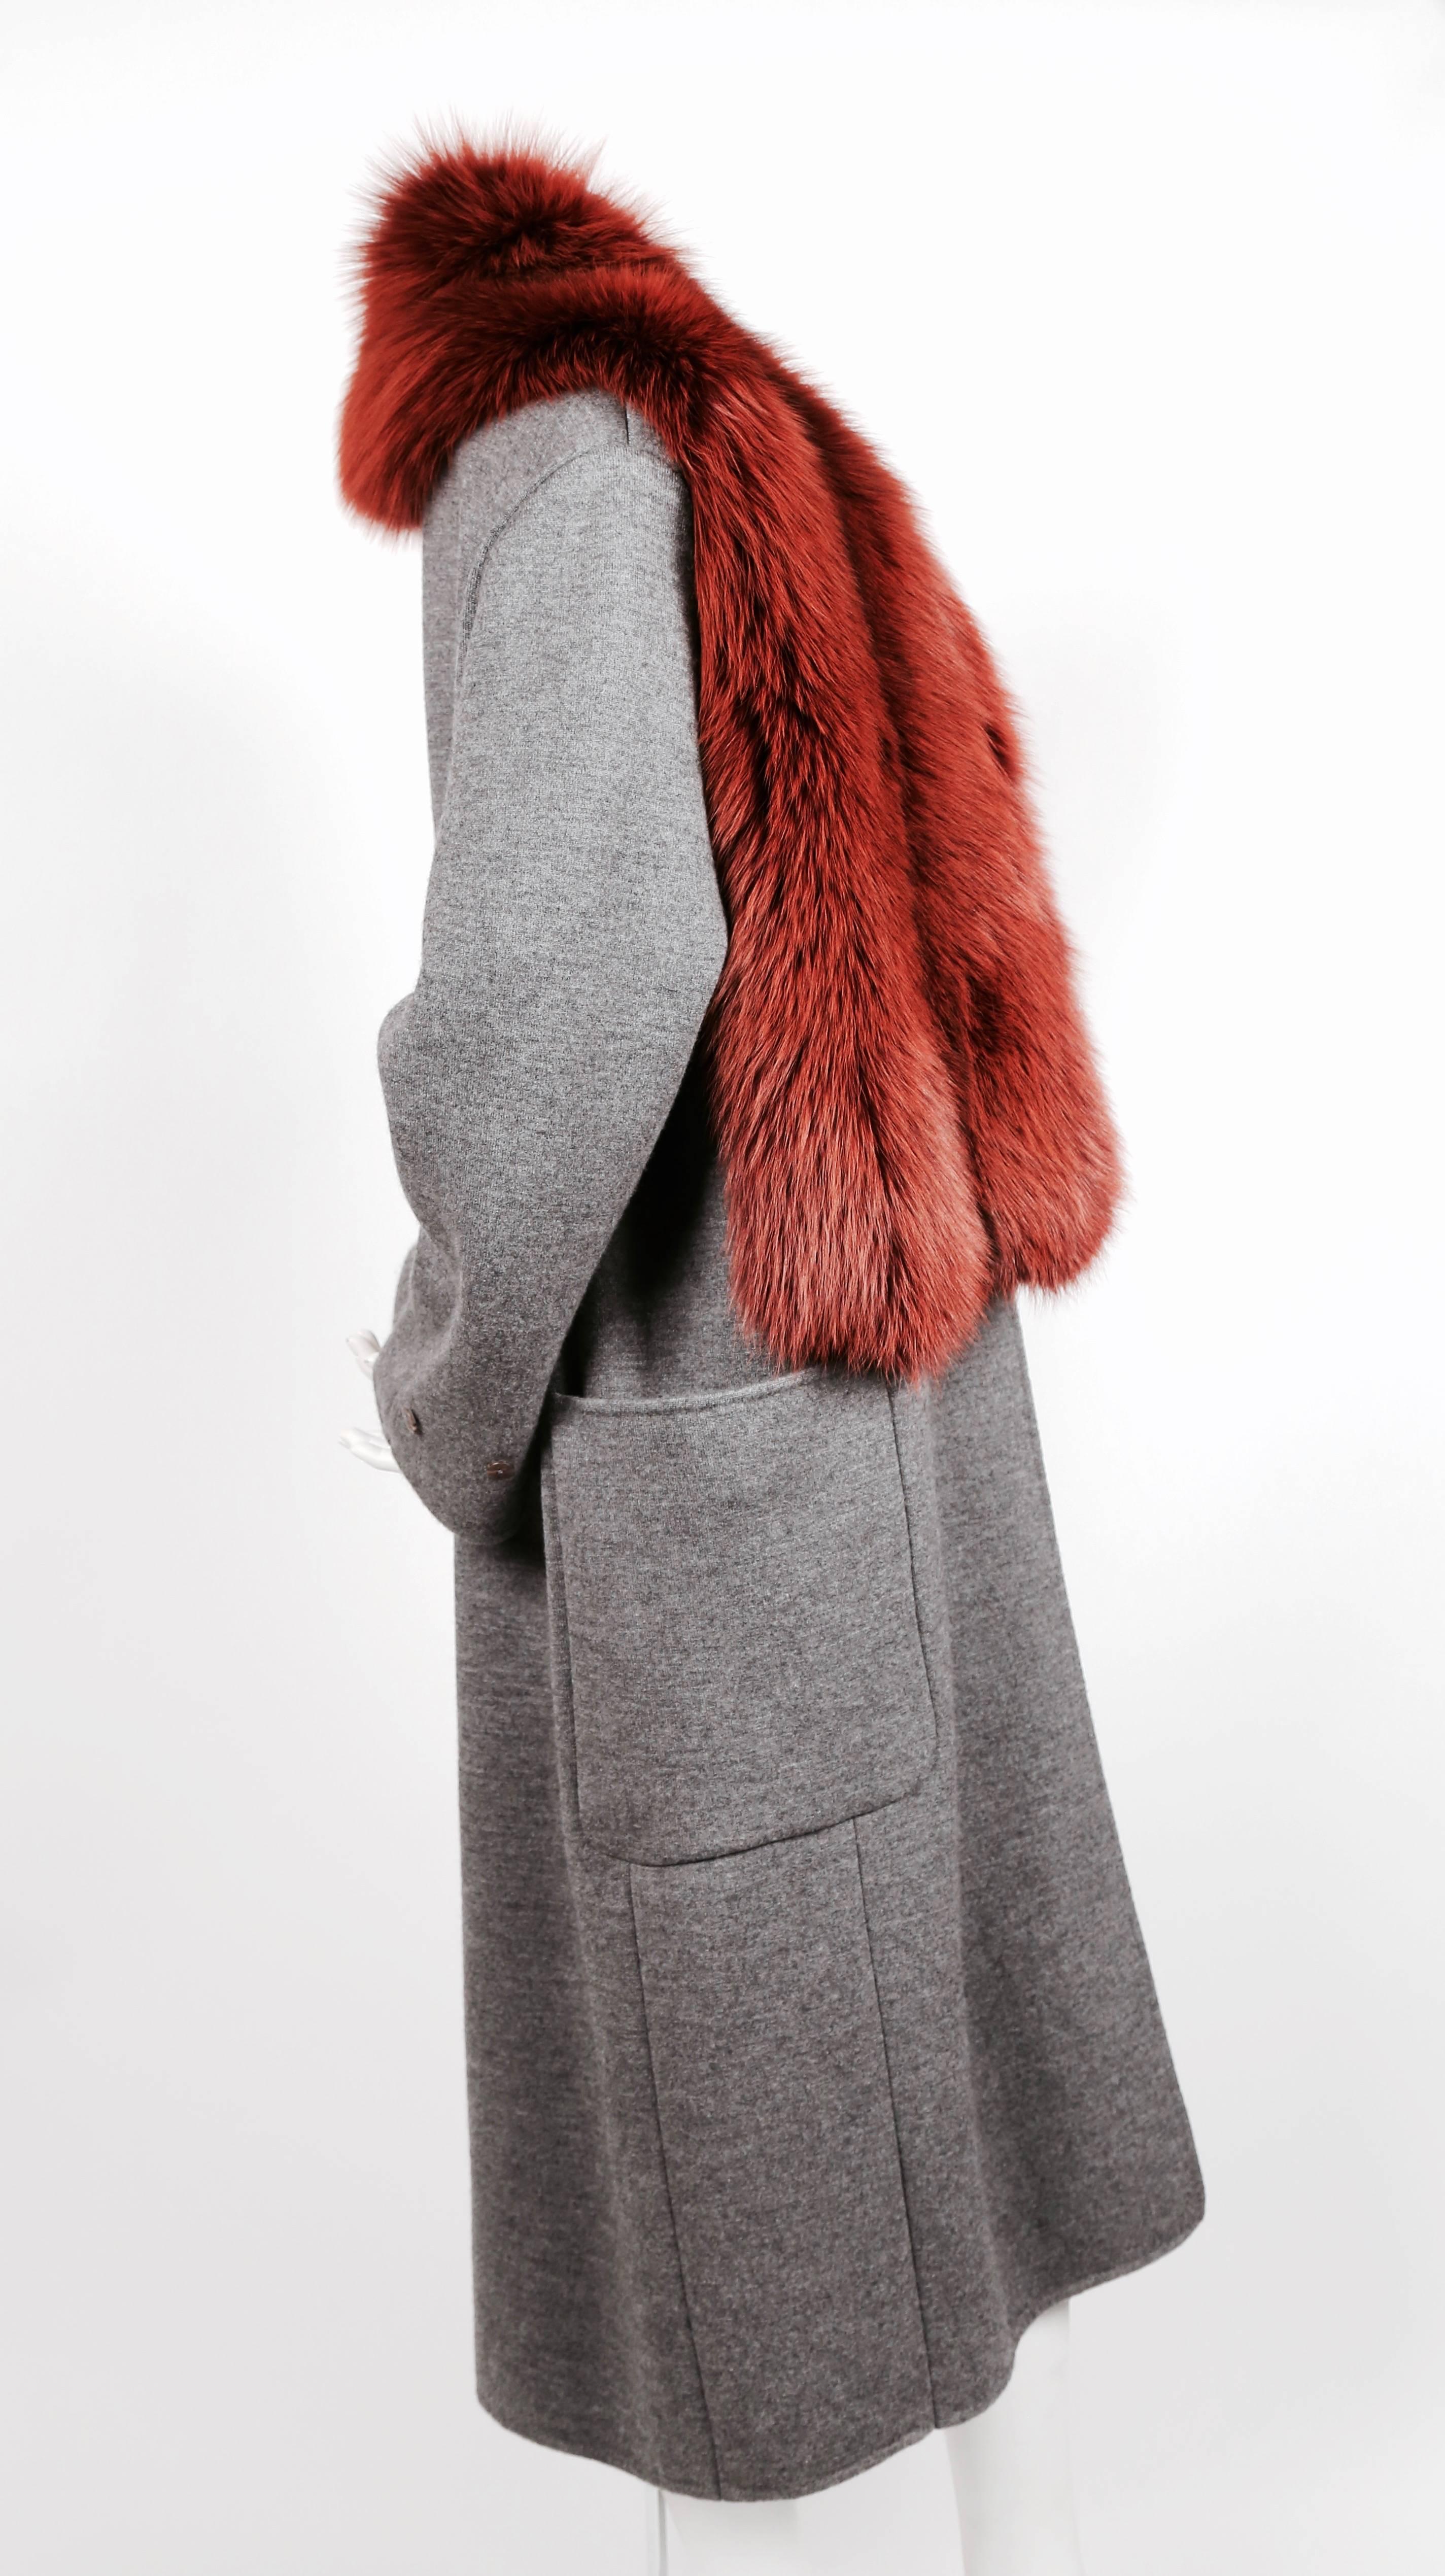 Exceptional grey wool, silk and cashmere blend coat with wrap around pockets, contrasting trim, button details and lush dyed fox fur collar designed by Phoebe Philo for Celine. French size 36. However, this coat has an oversized fit so it can fit